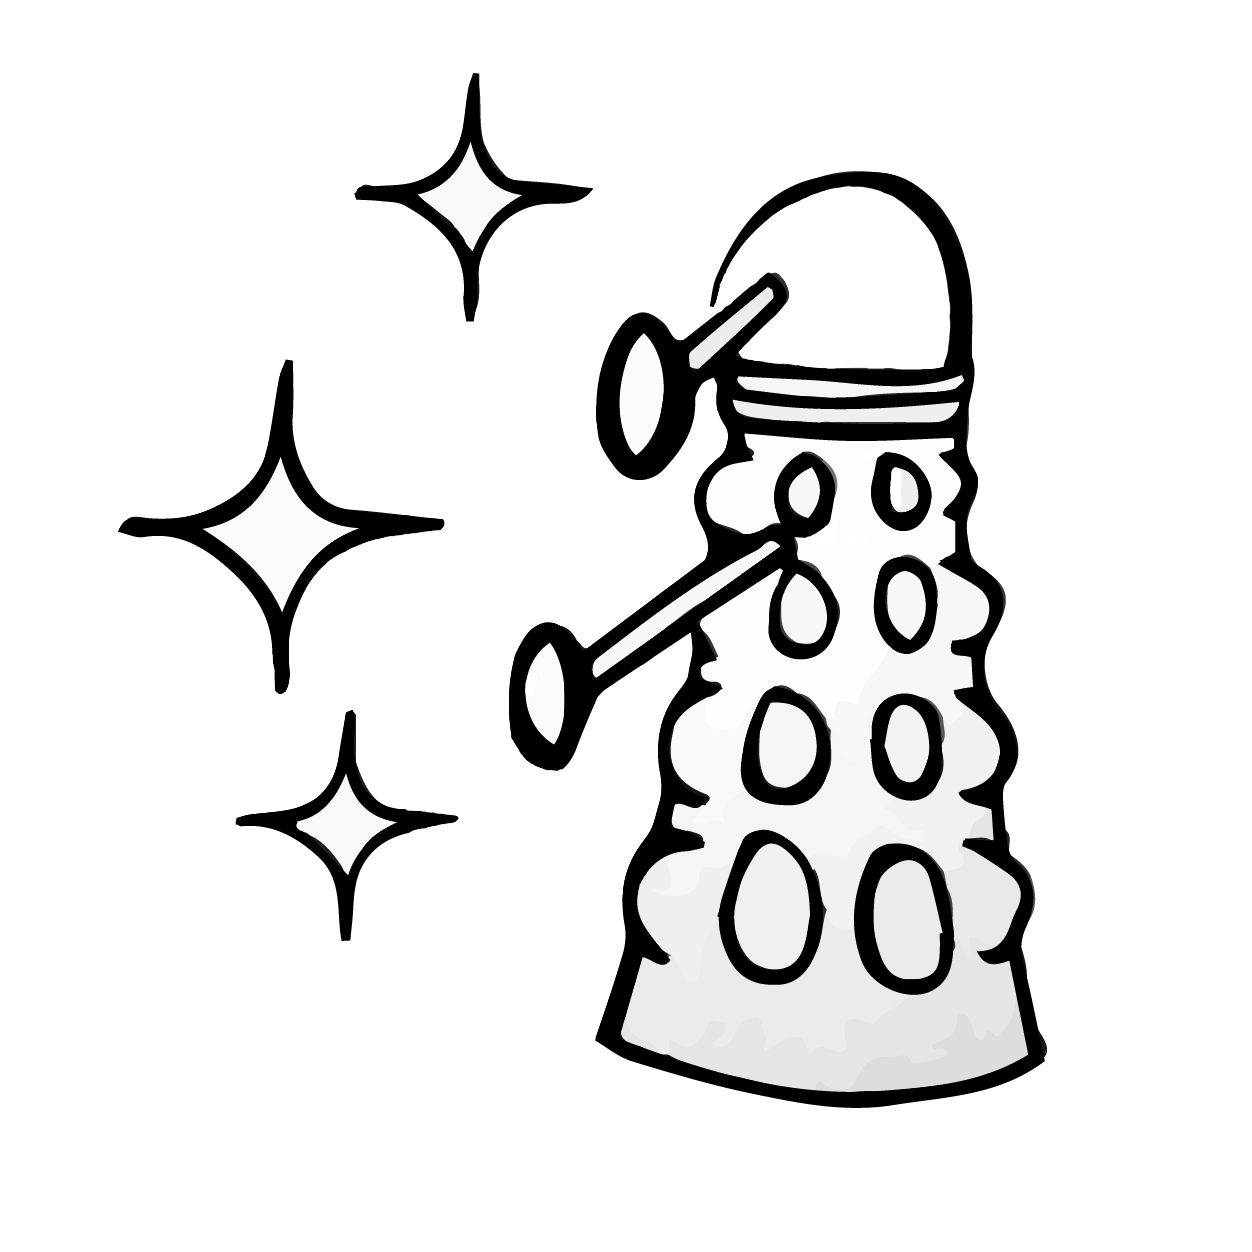 dalek-cryptography logo: a dalek with edwards curves as sparkles coming out of its radar-schnozzley blaster thingies